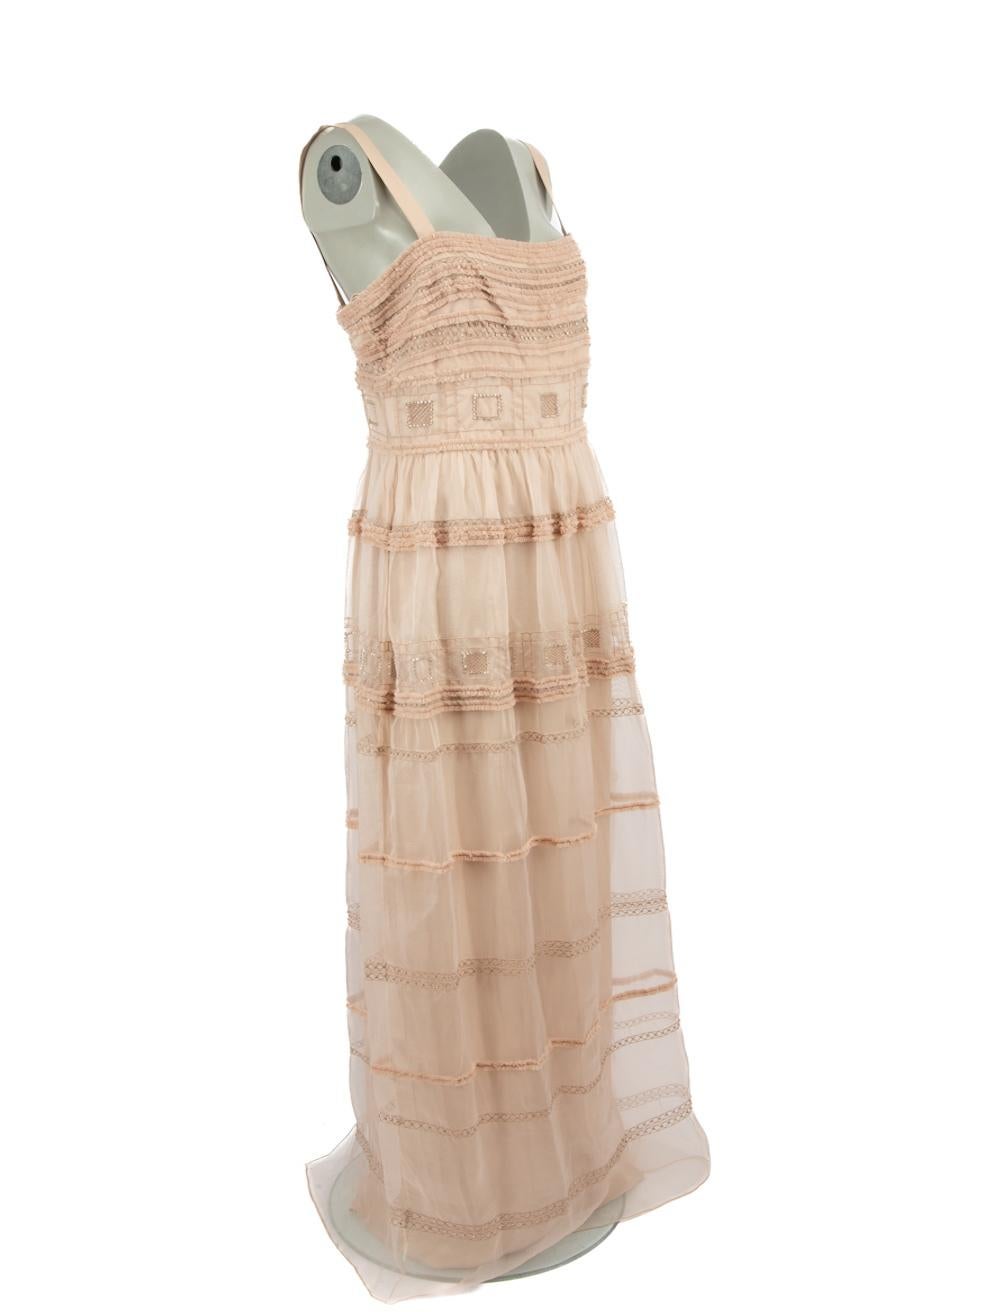 CONDITION is Very good. Minimal wear to dress is evident. Minimal wear to the centre-front with small mark on this used Temperley London designer resale item.
 
Details
Pink
Silk
Maxi gown
Sleeveless
Square neck
Crystal embellished
Tulle